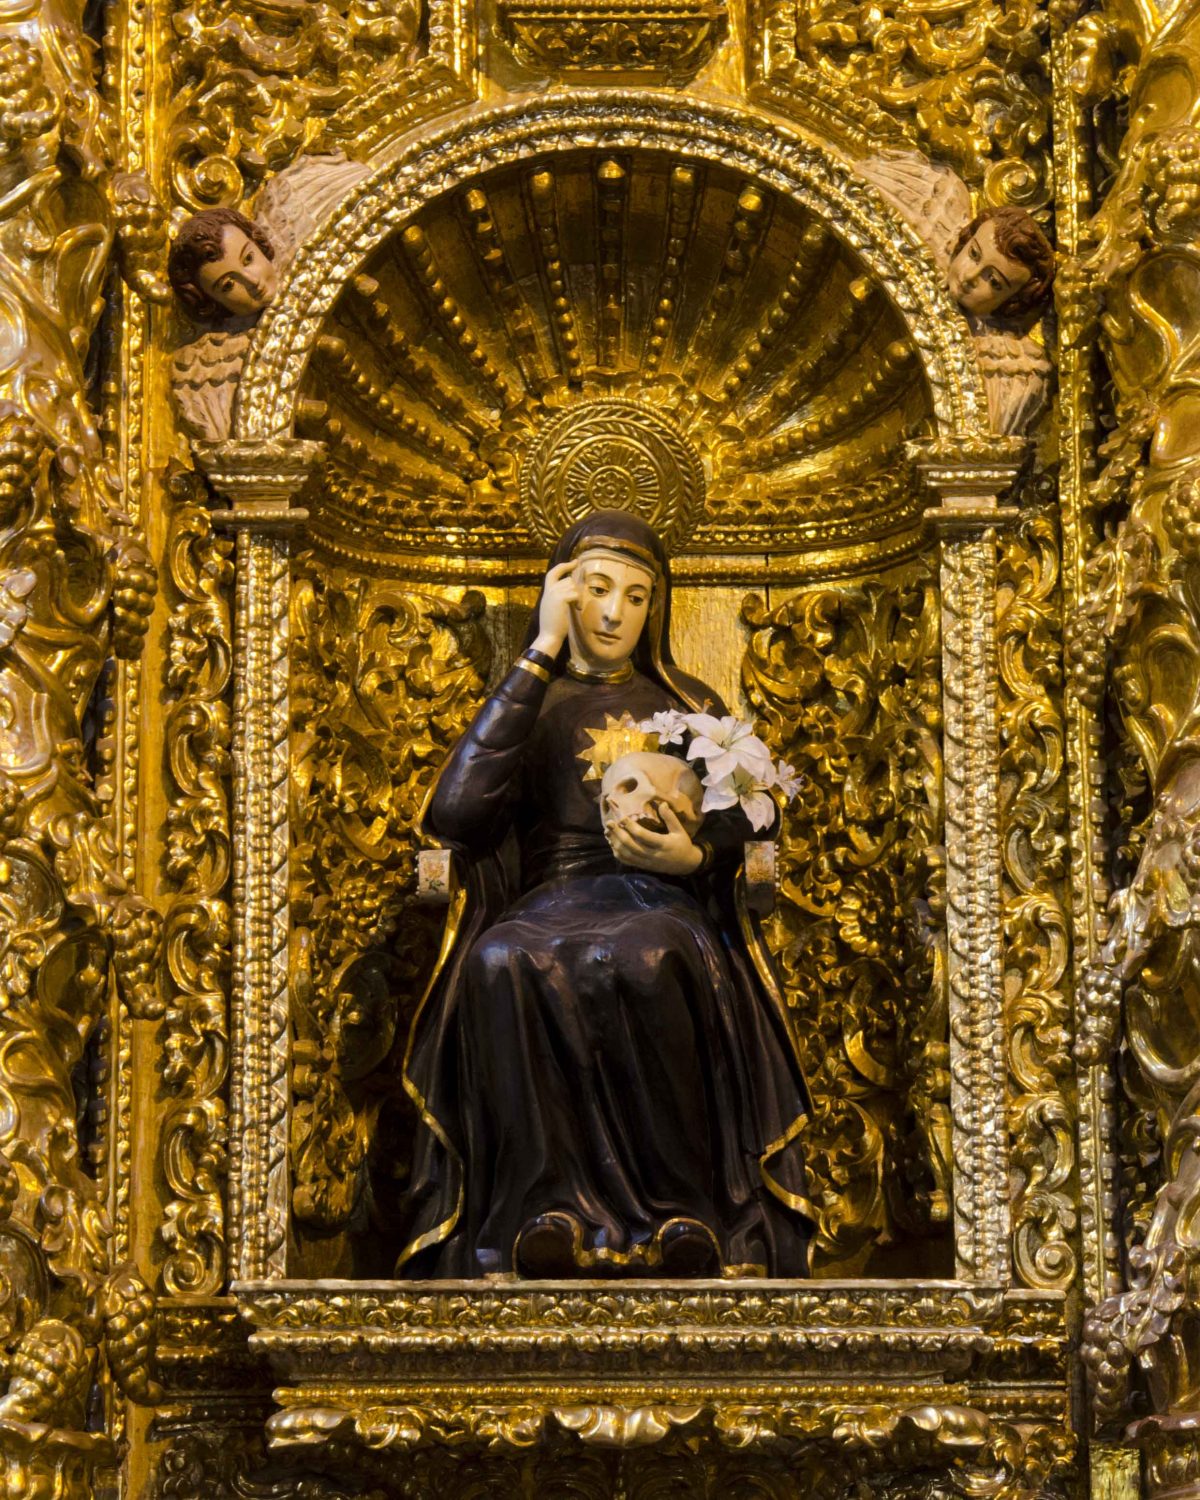 Mariana de Jesus, the patron saint of Quito; La Compania de Jesus, dressed in black robes, seated holding a skull and lilies, surrounded by gold details | ©Angela Drake